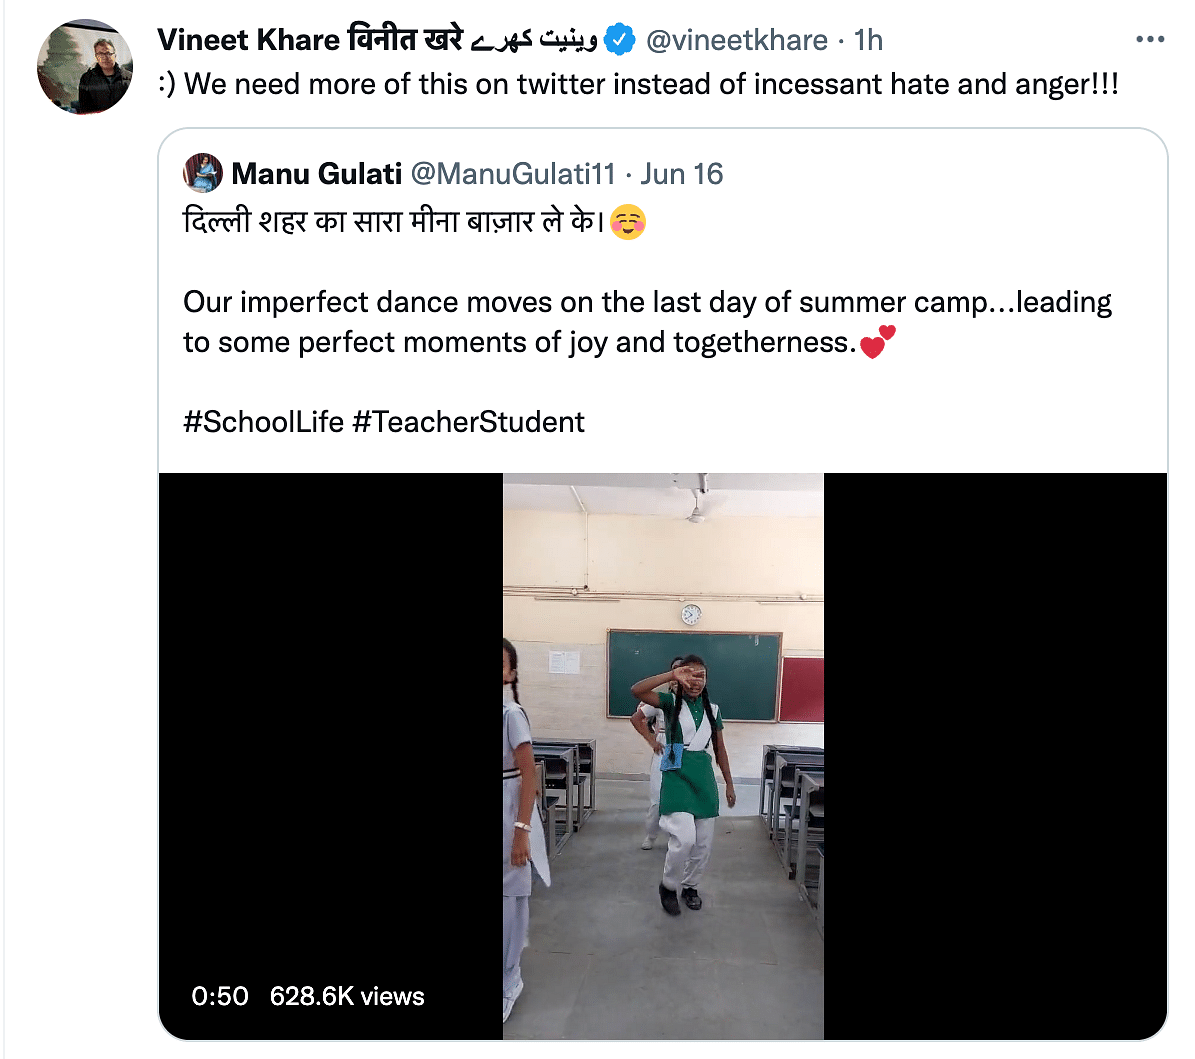 Manu Gulati, a teacher from a government school in Delhi, went viral for dancing with her students.